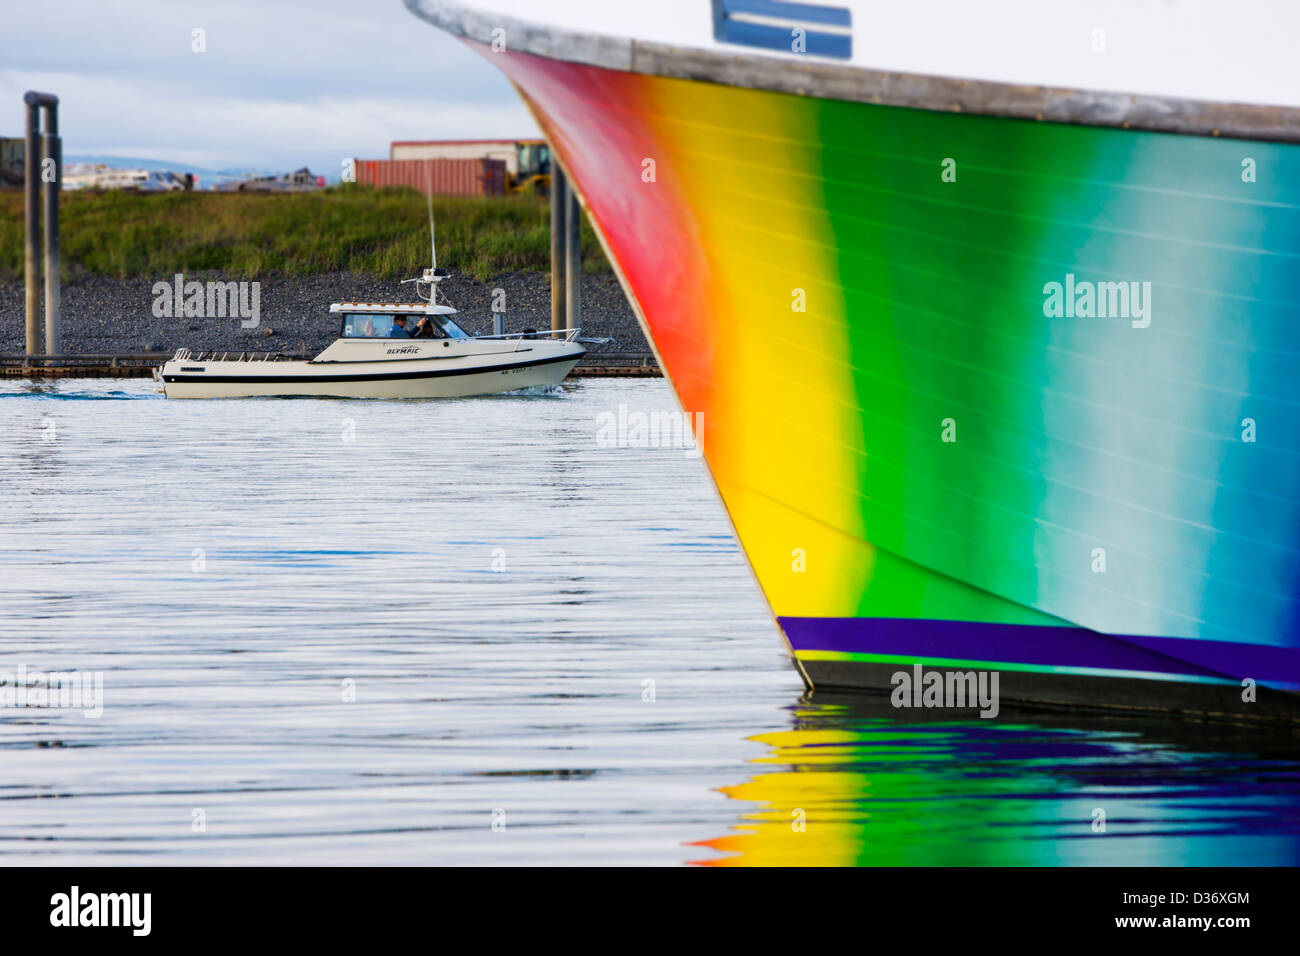 Charter and commercial fishing boats in the harbor, Homer, Alaska, USA, Colorful hull of the Rainbow Connection charter boat. Stock Photo